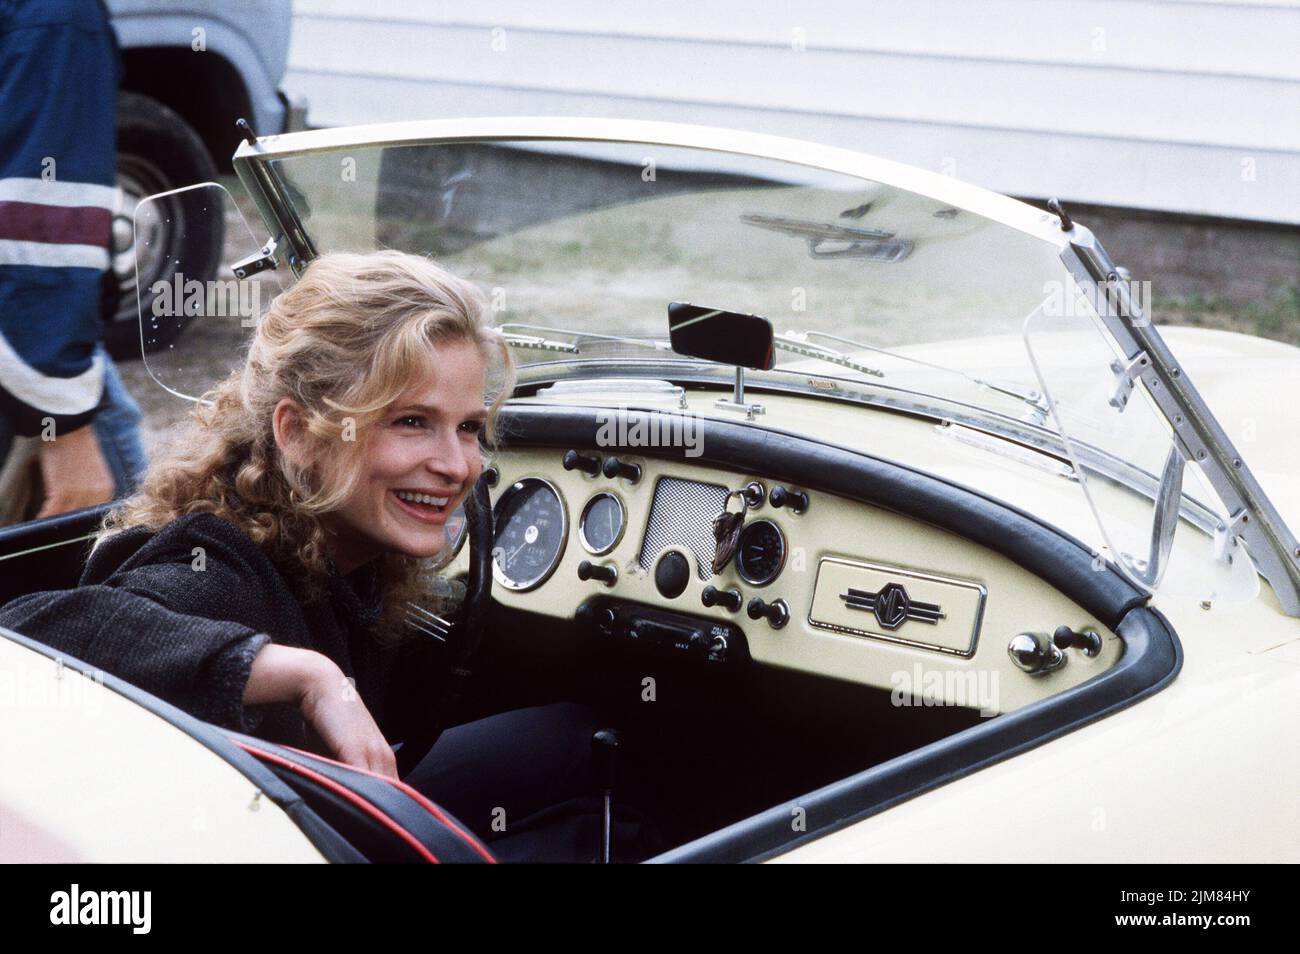 KYRA SEDGWICK in SOMETHING TO TALK ABOUT (1995), directed by LASSE HALLSTROM. Credit: WARNER BROTHERS / Album Stock Photo